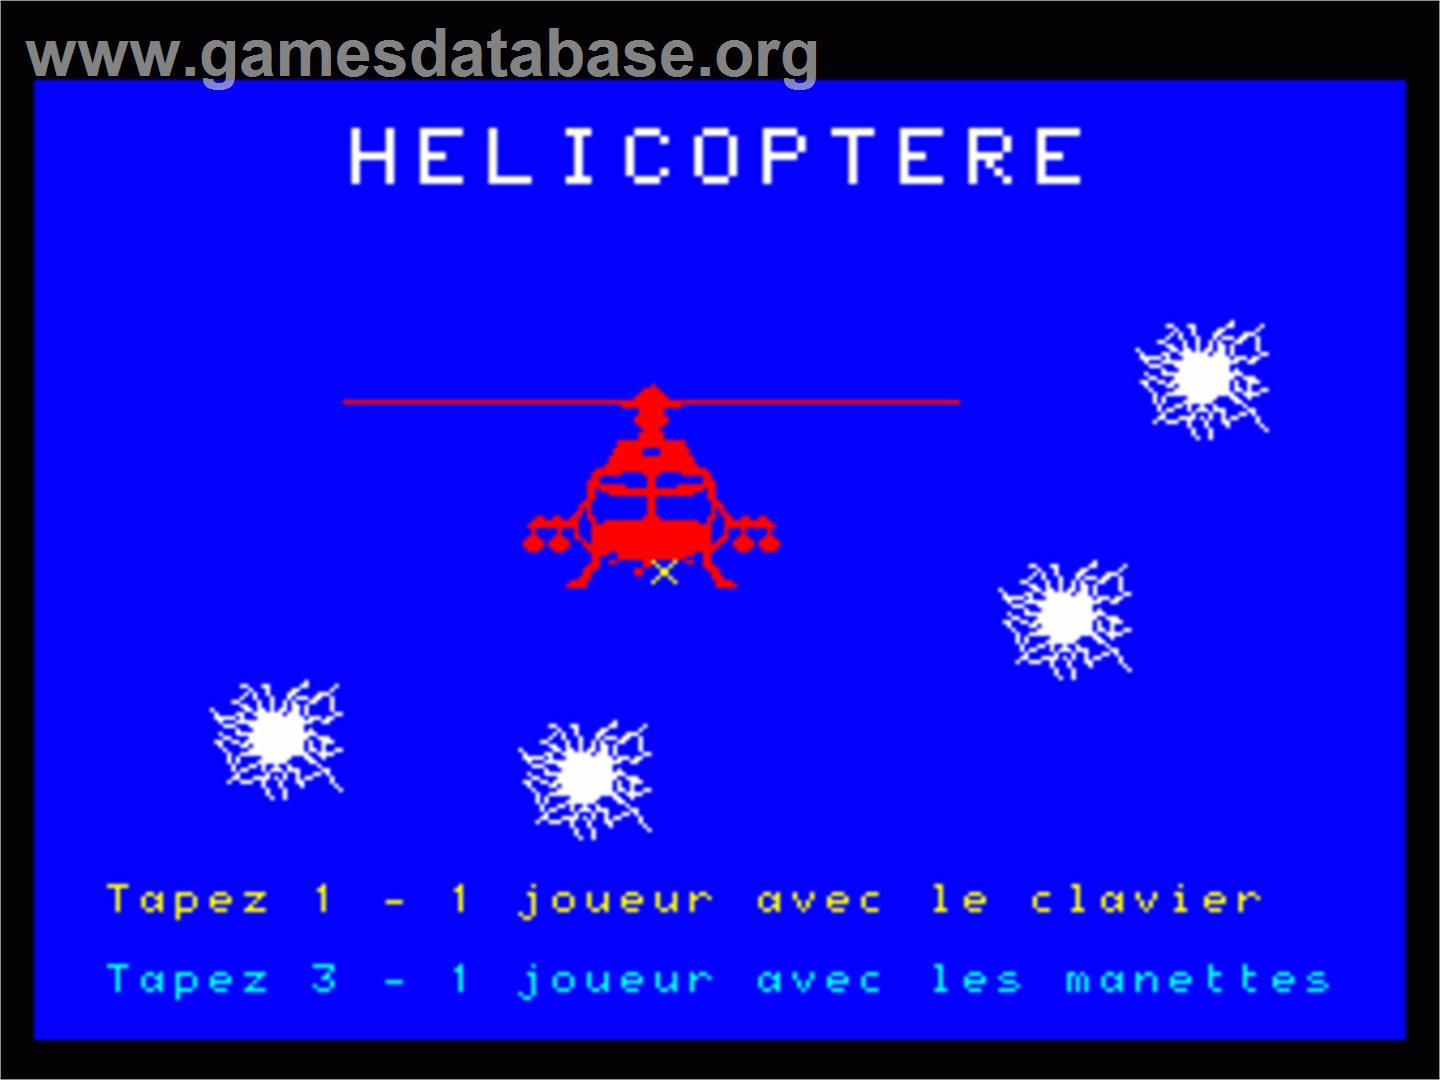 Helicoptere - Philips VG 5000 - Artwork - Title Screen